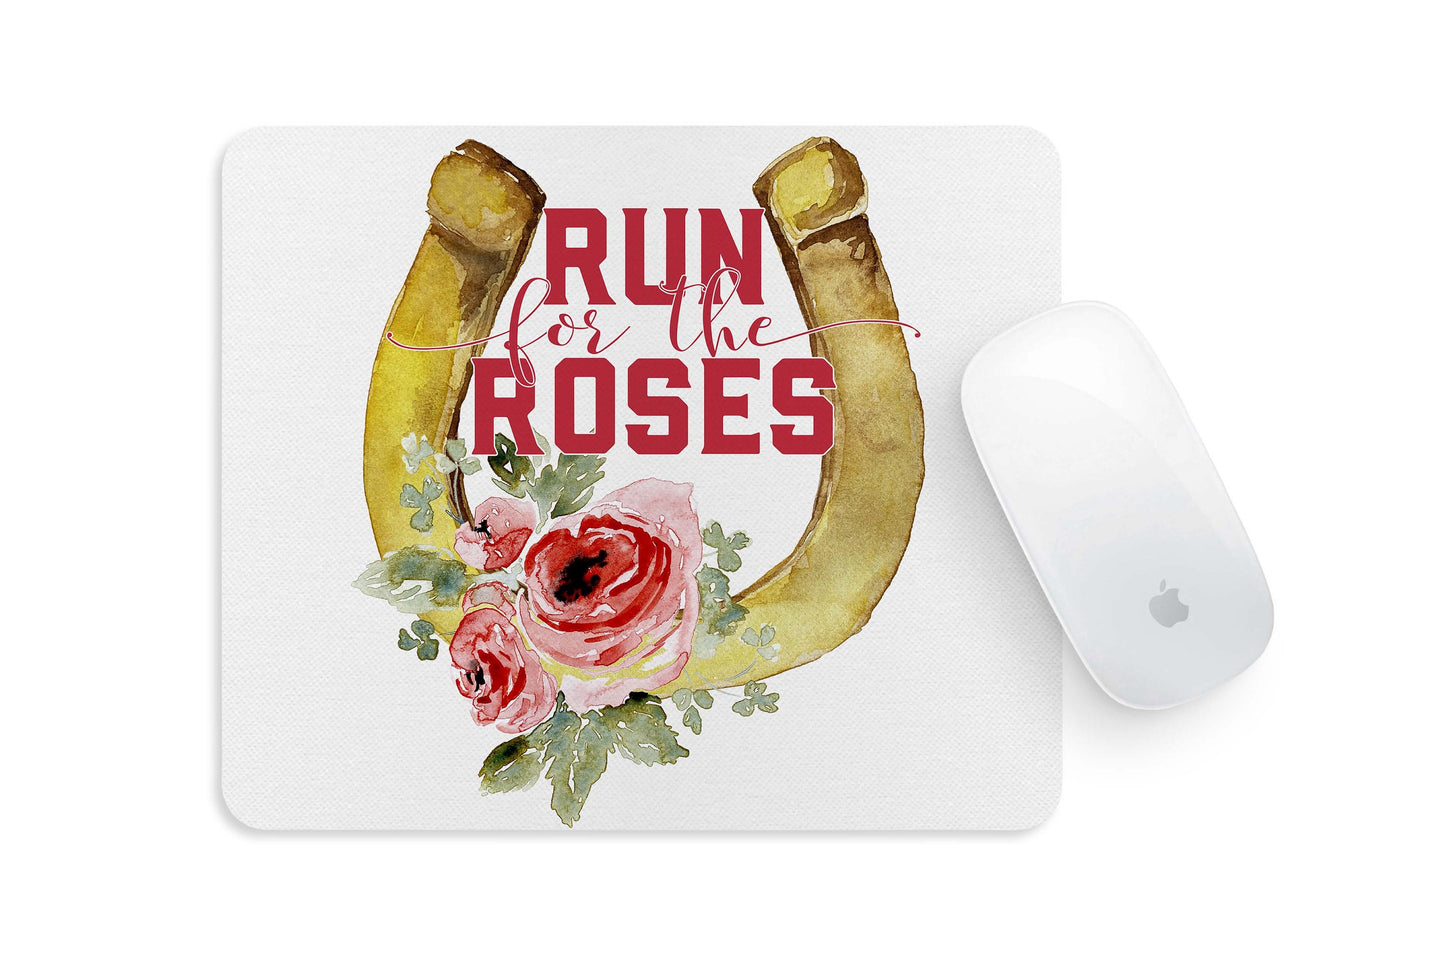 Derby png - Kentucky Derby - Roses - Watercolor floral - Sublimation - Waterslide - Derby Design - Horse Racing - Derby - Run For The Roses